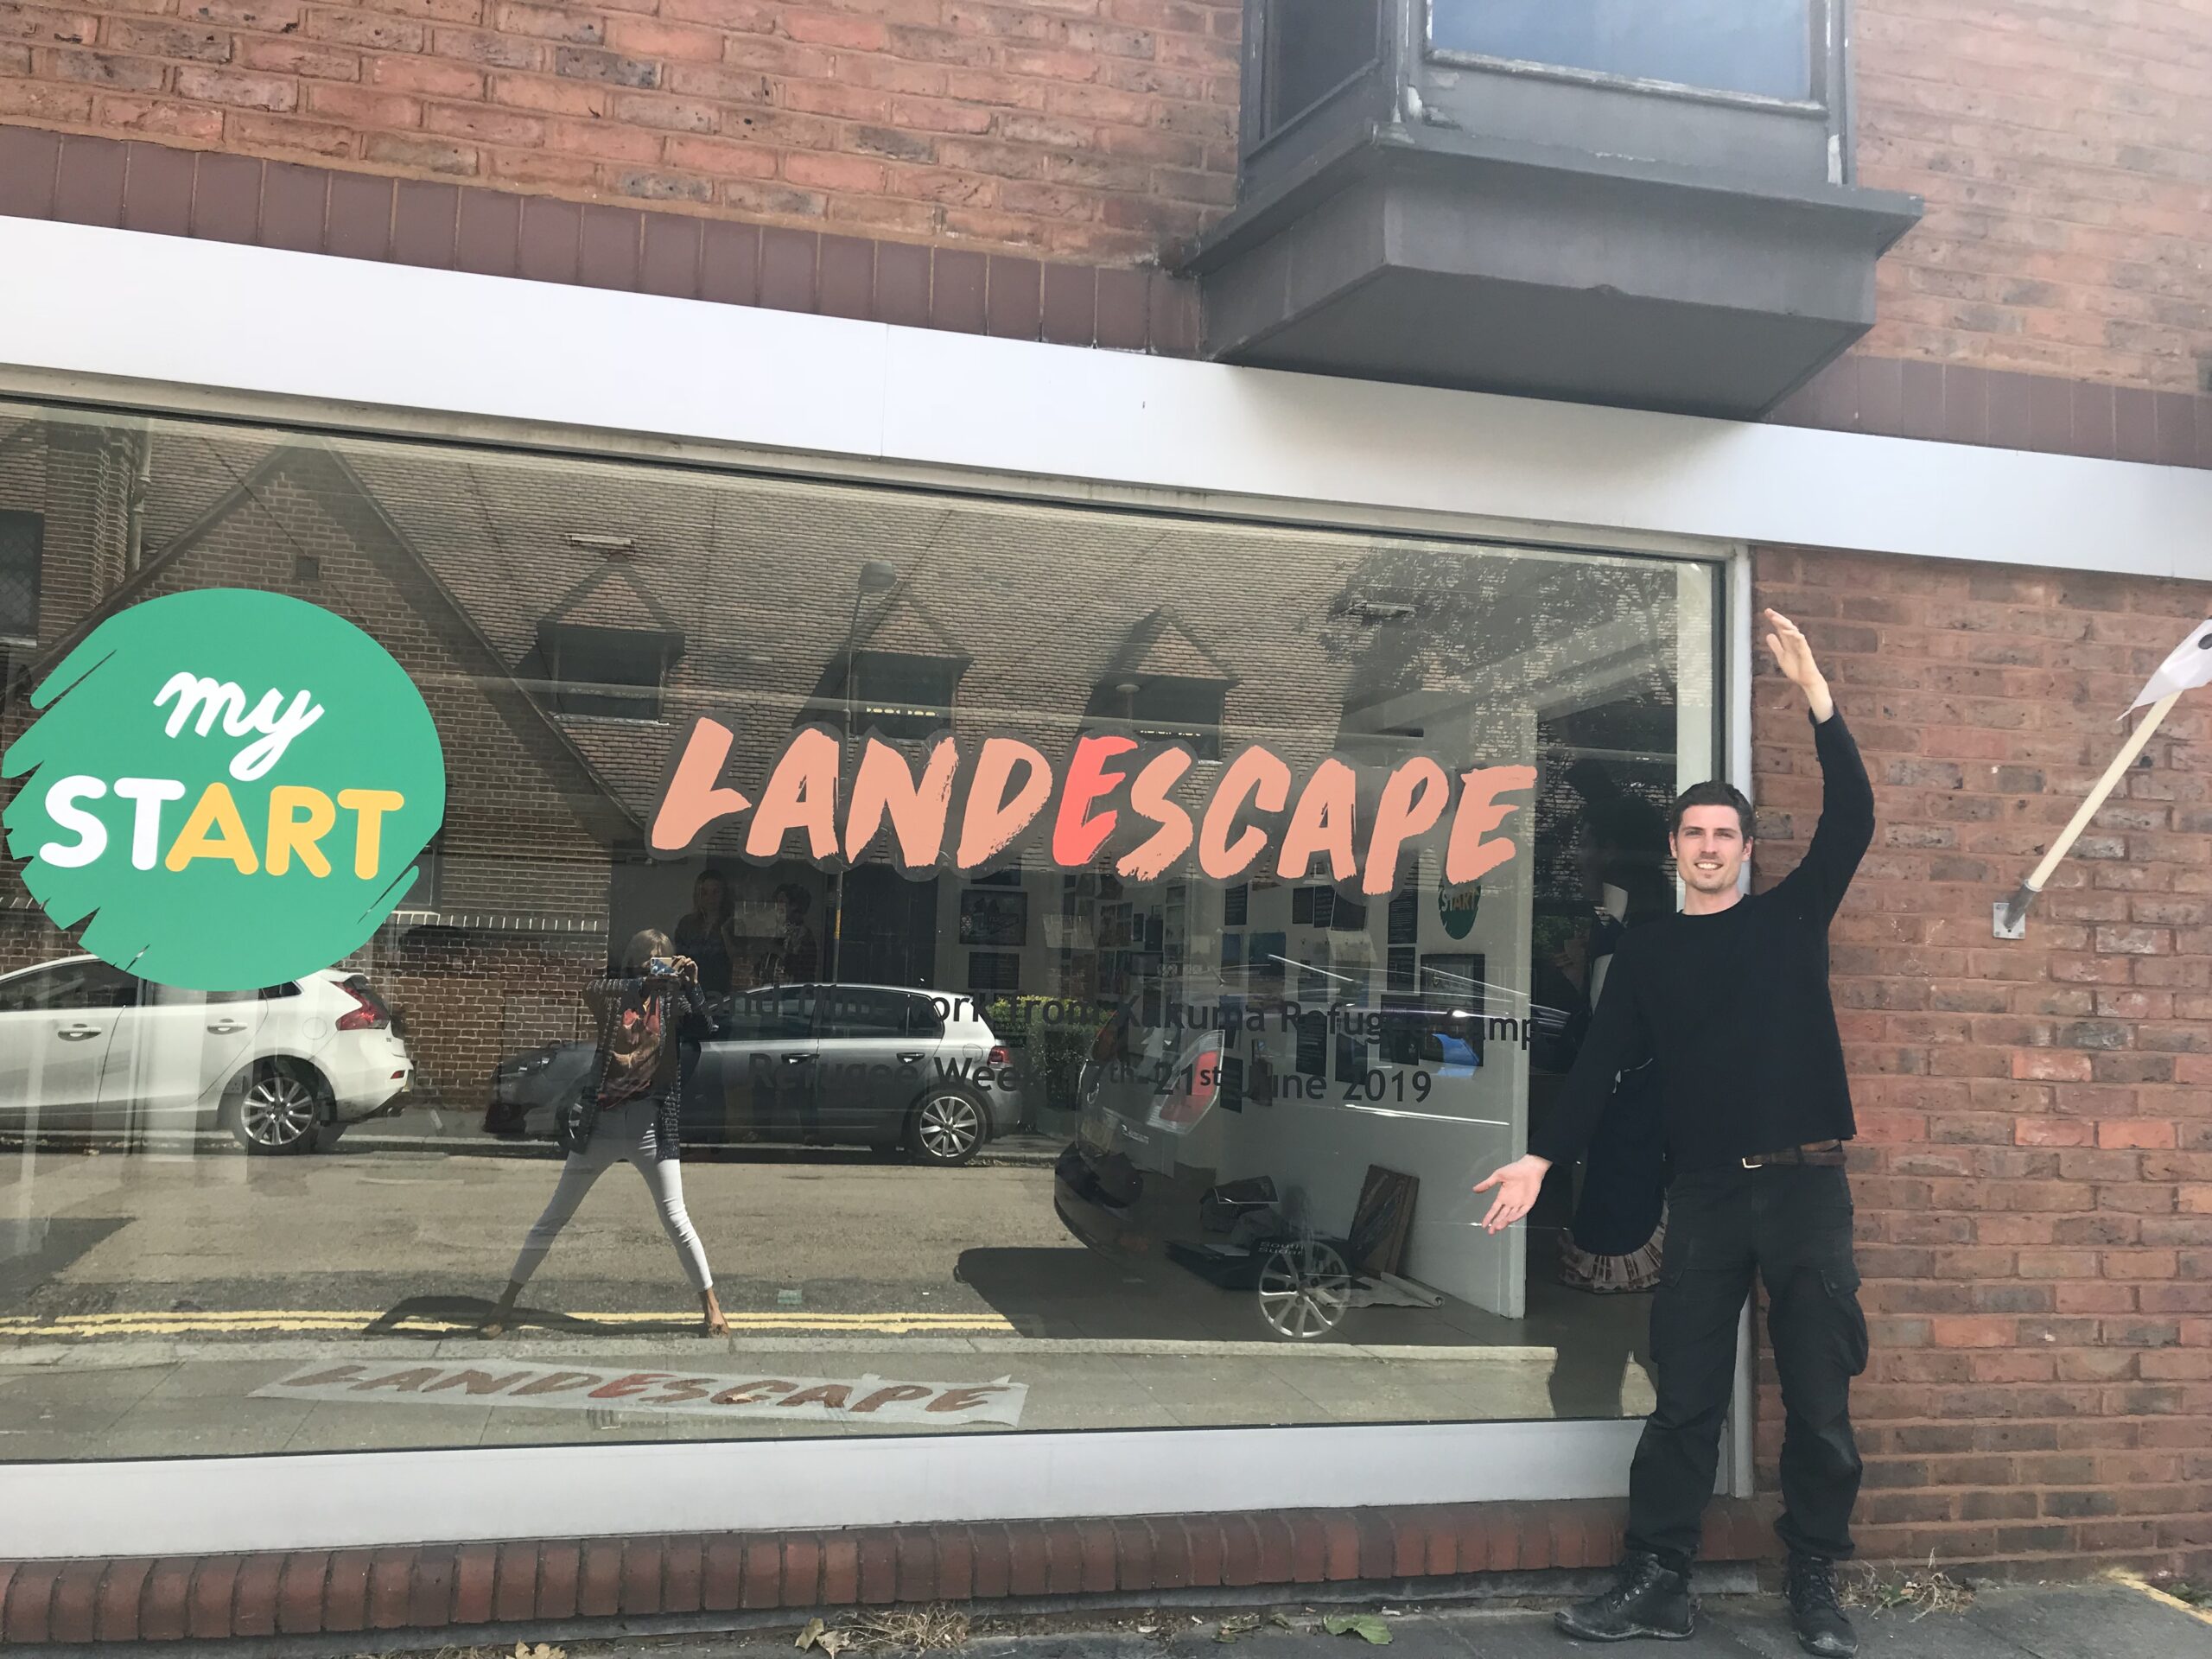 You are currently viewing “LandEscape” – Refugee Week 2019 @ Friday Sari Project